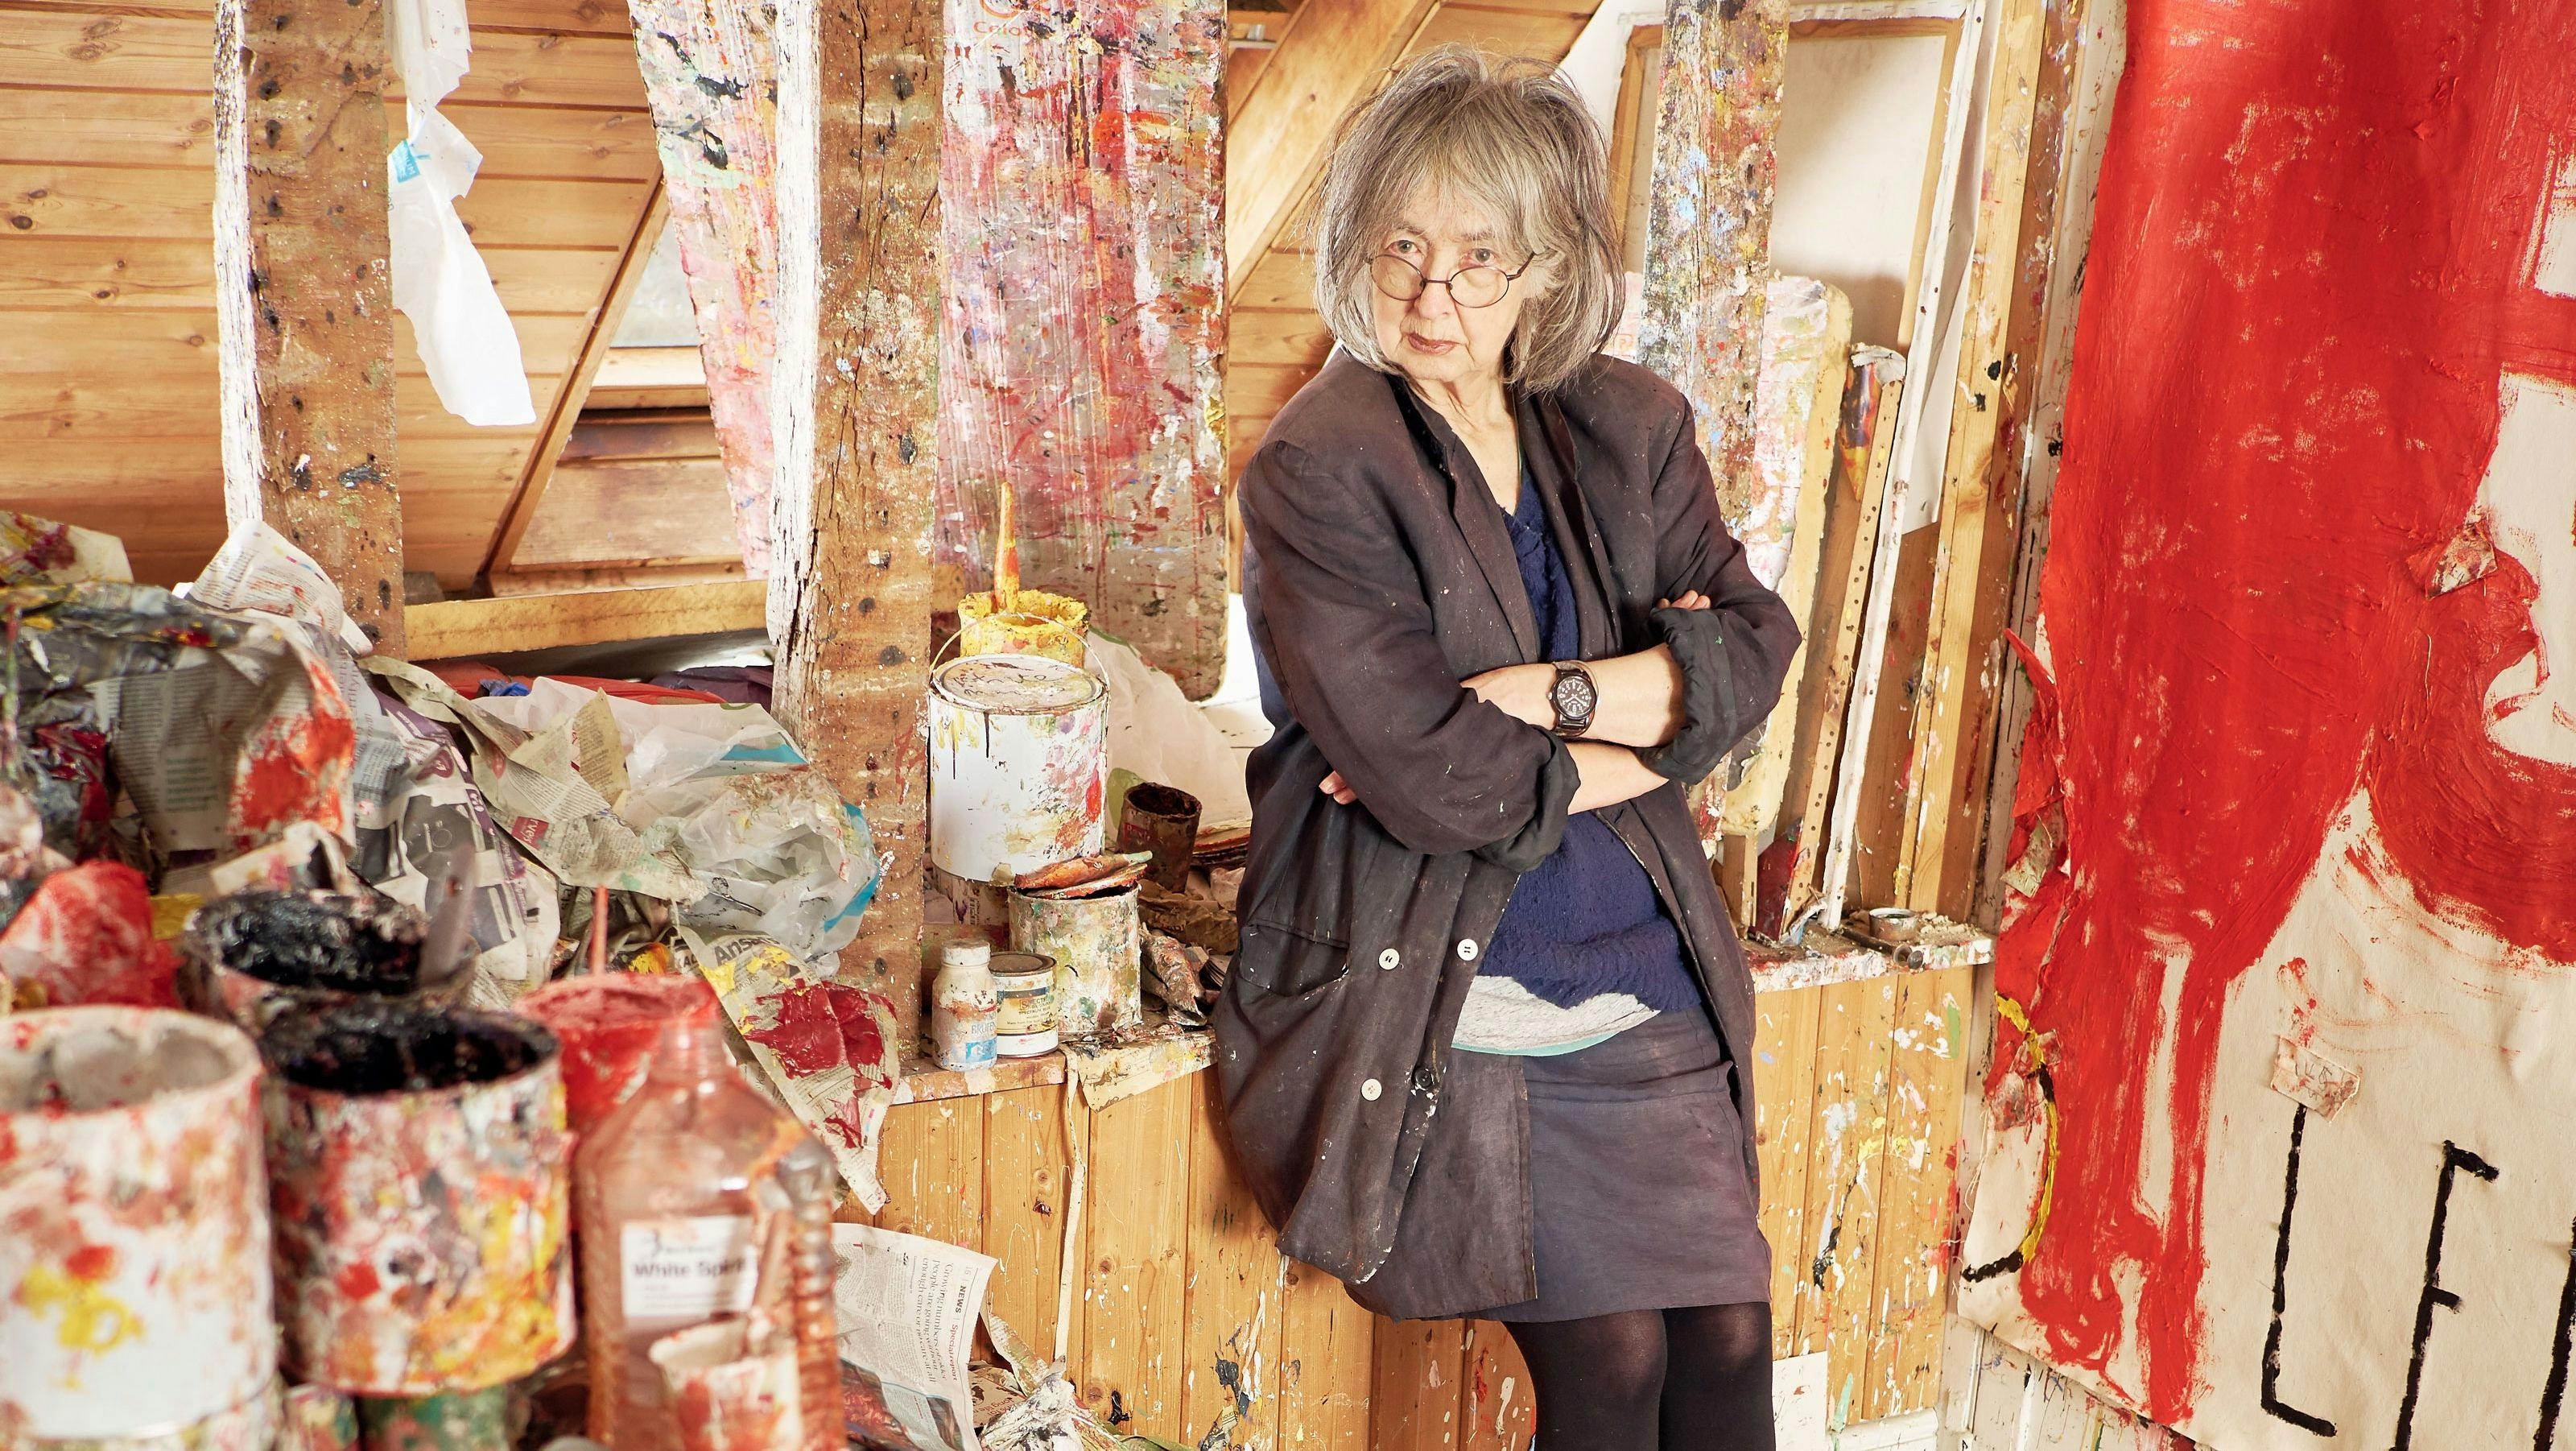 A photograph of Rose Wylie in her studio by Joe McGorty.